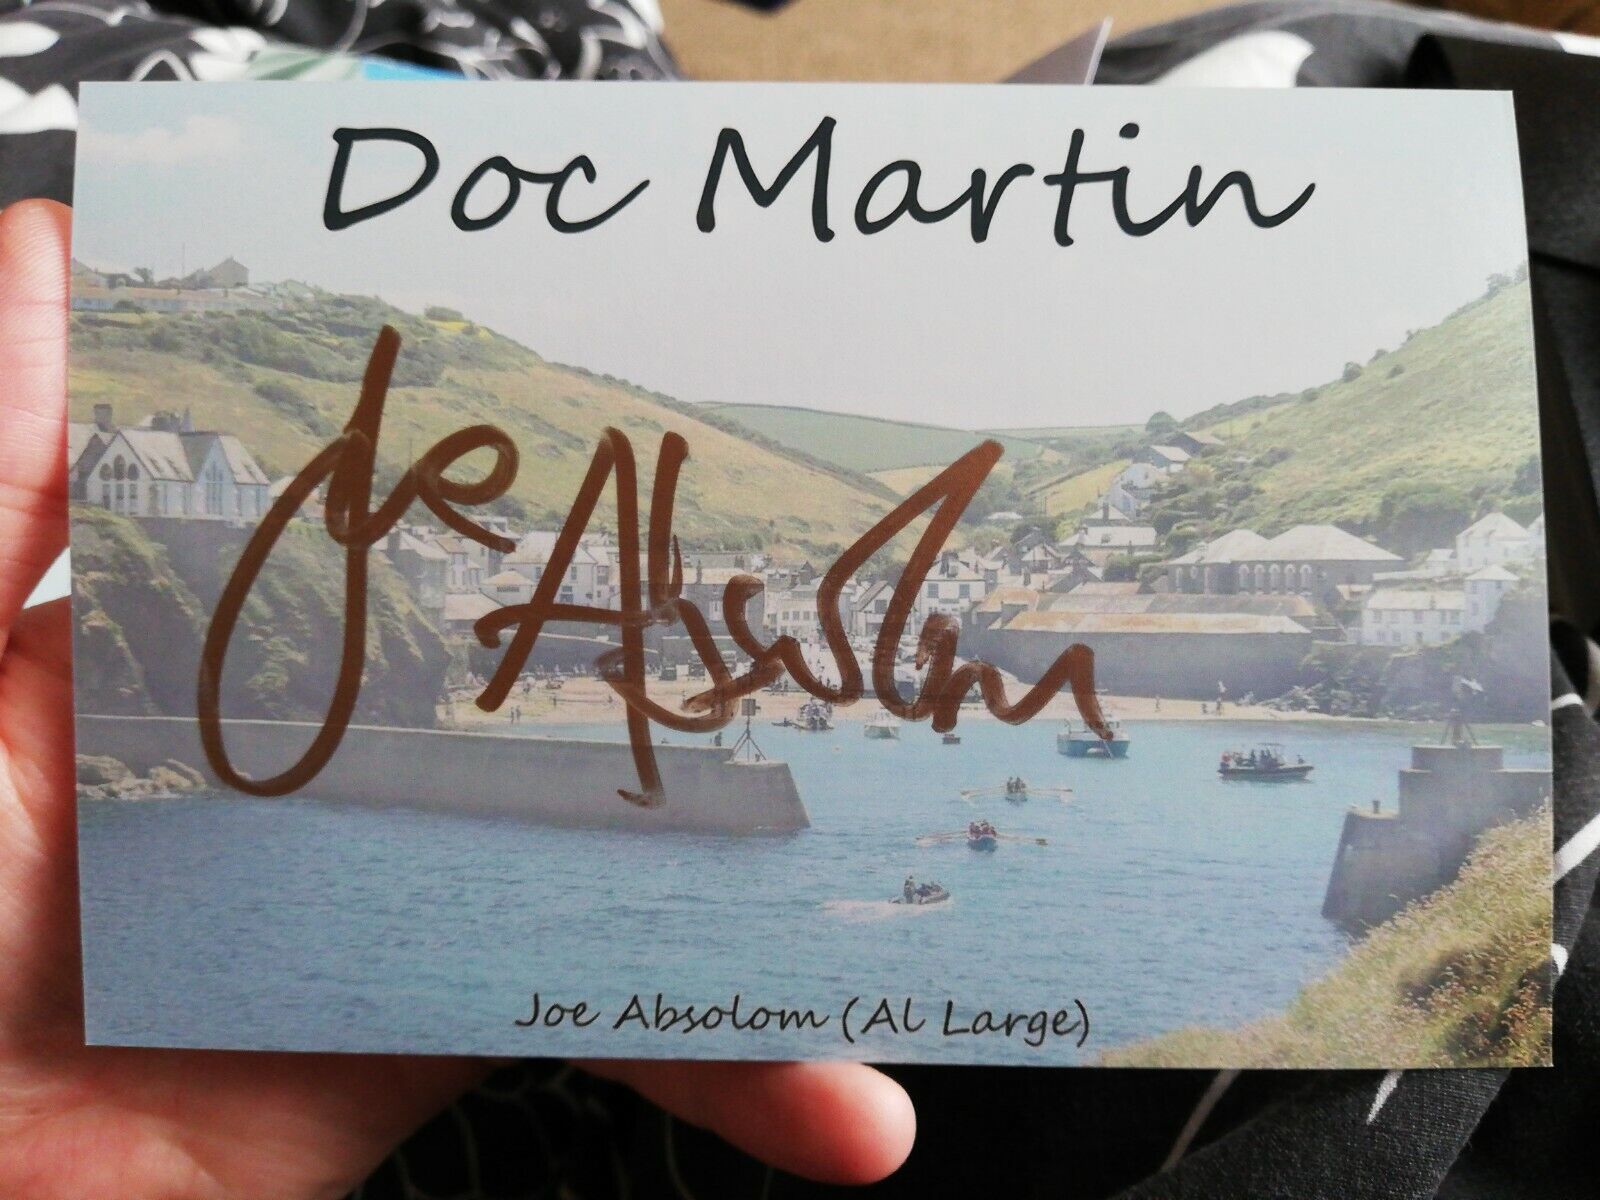 Joe Absolom Al Large Doc Martin signed 6x4 inch picture